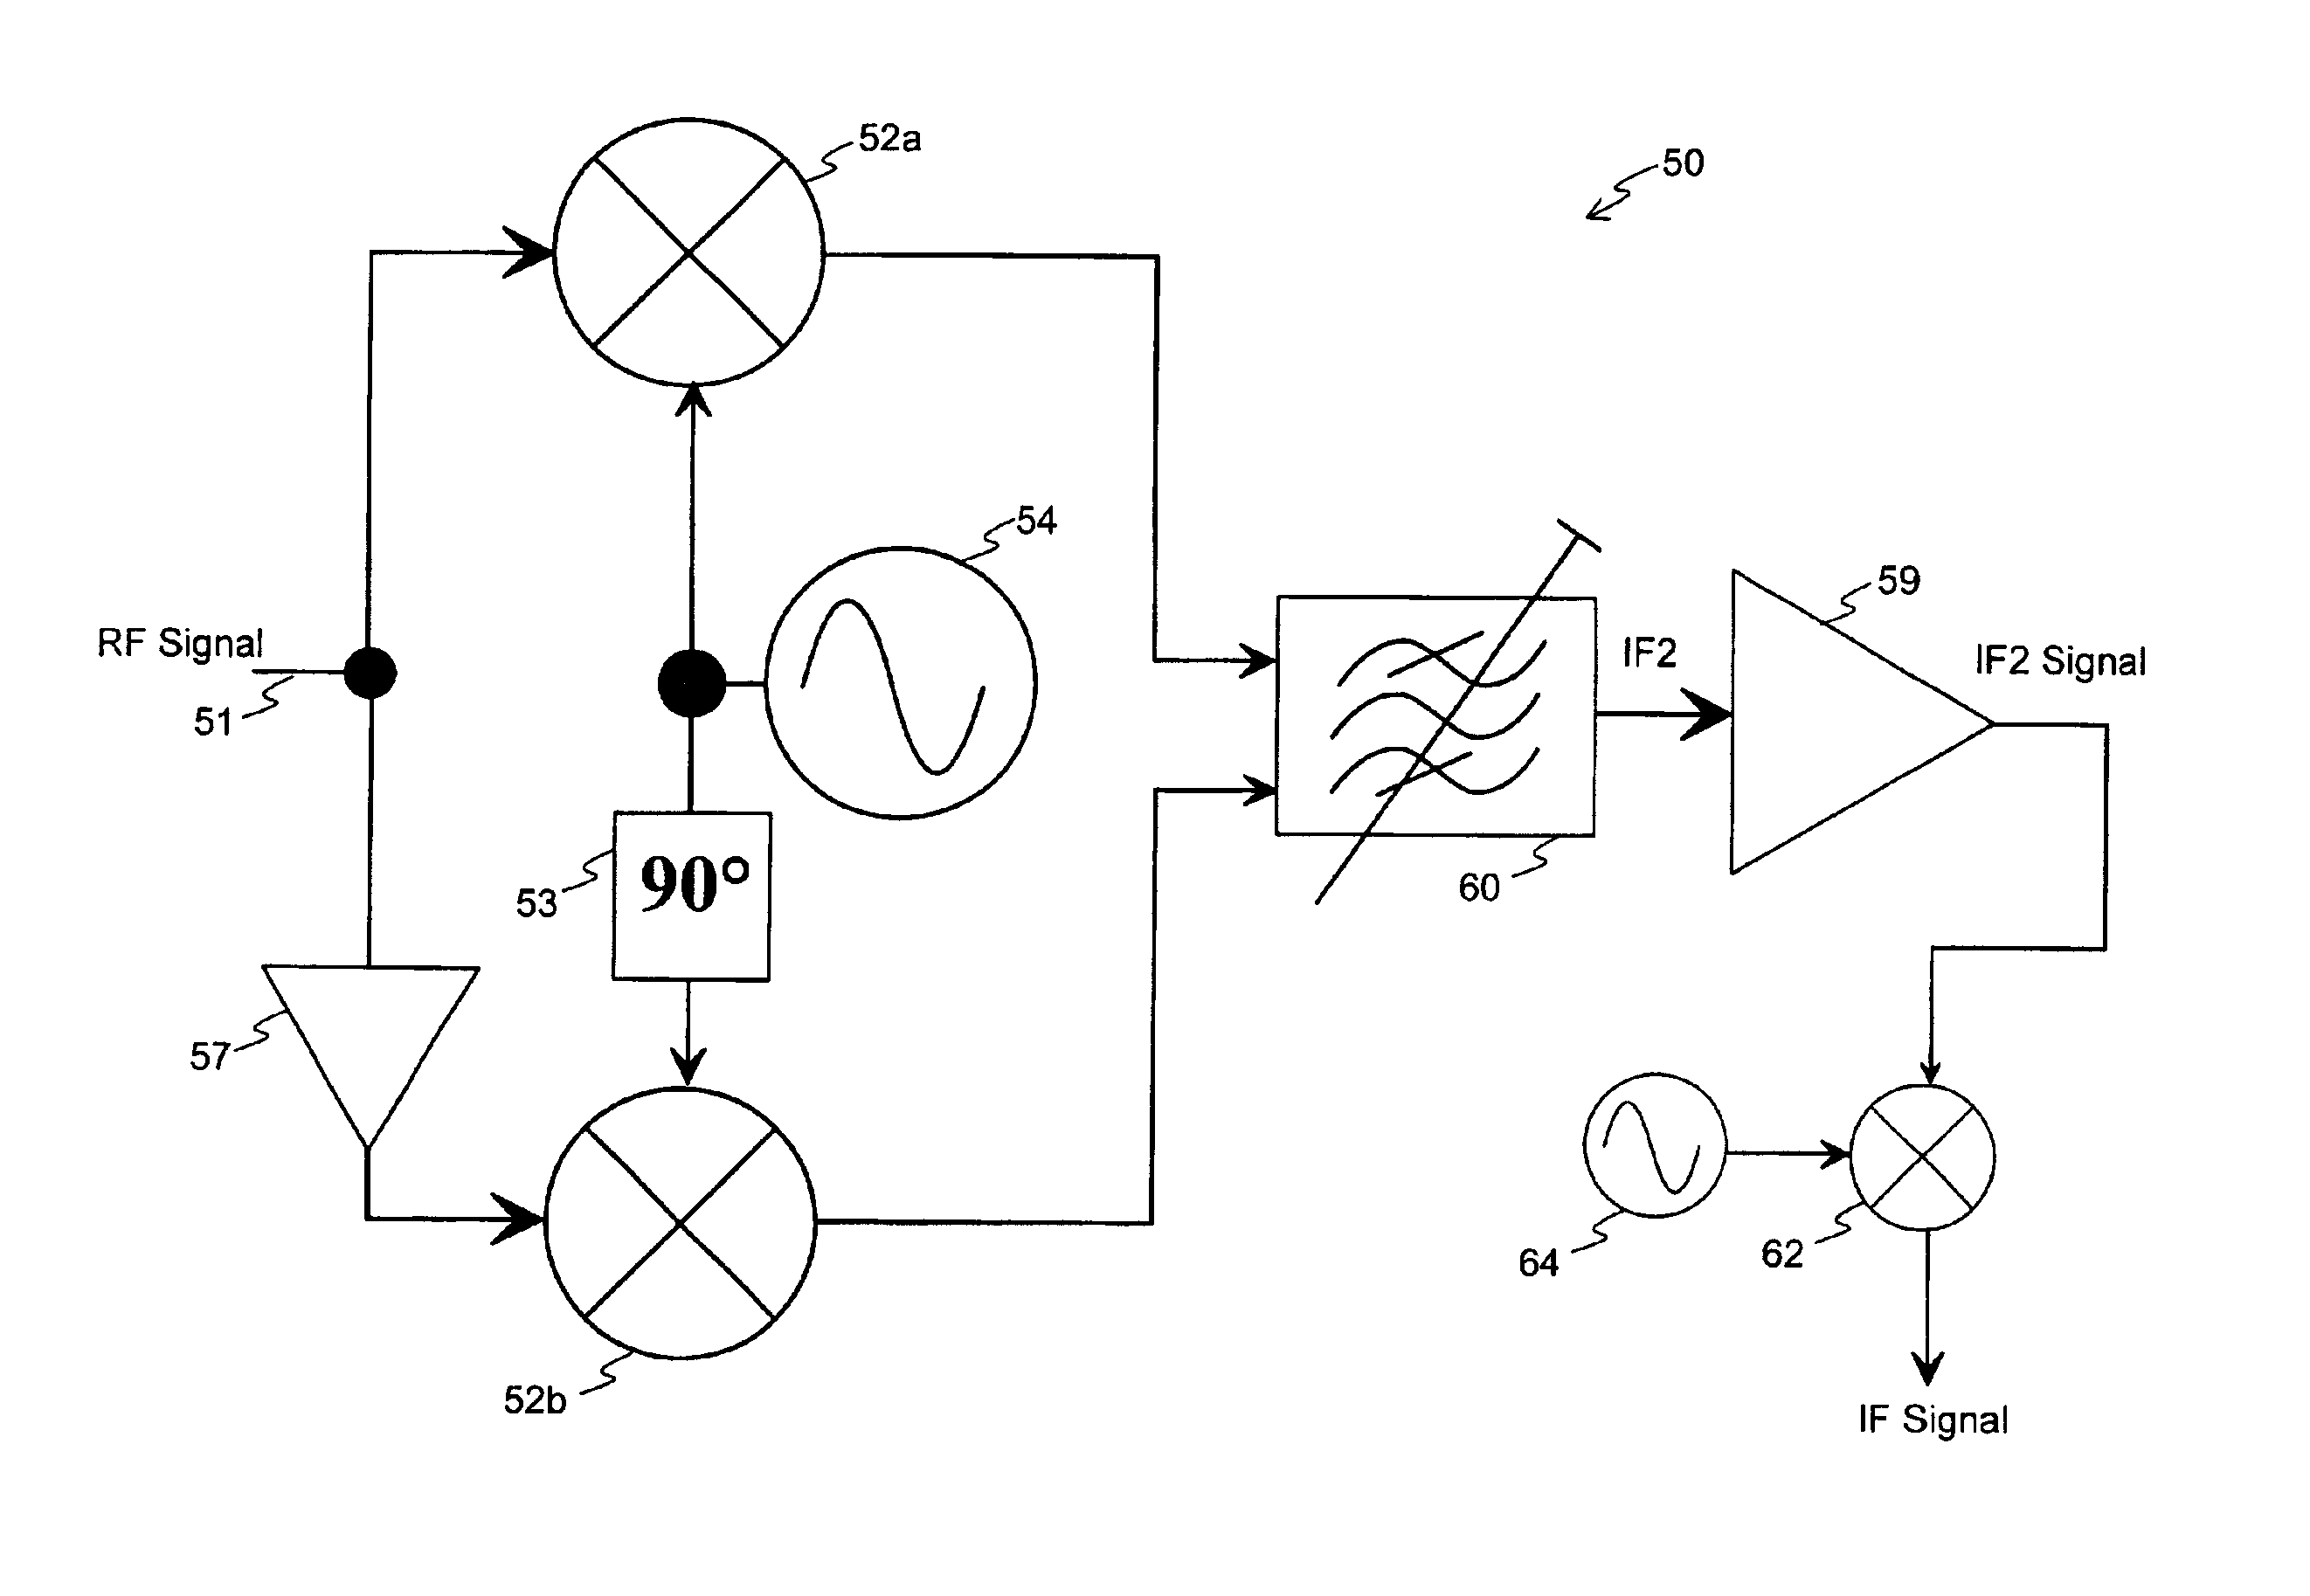 Image rejection mixer for broadband signal reception